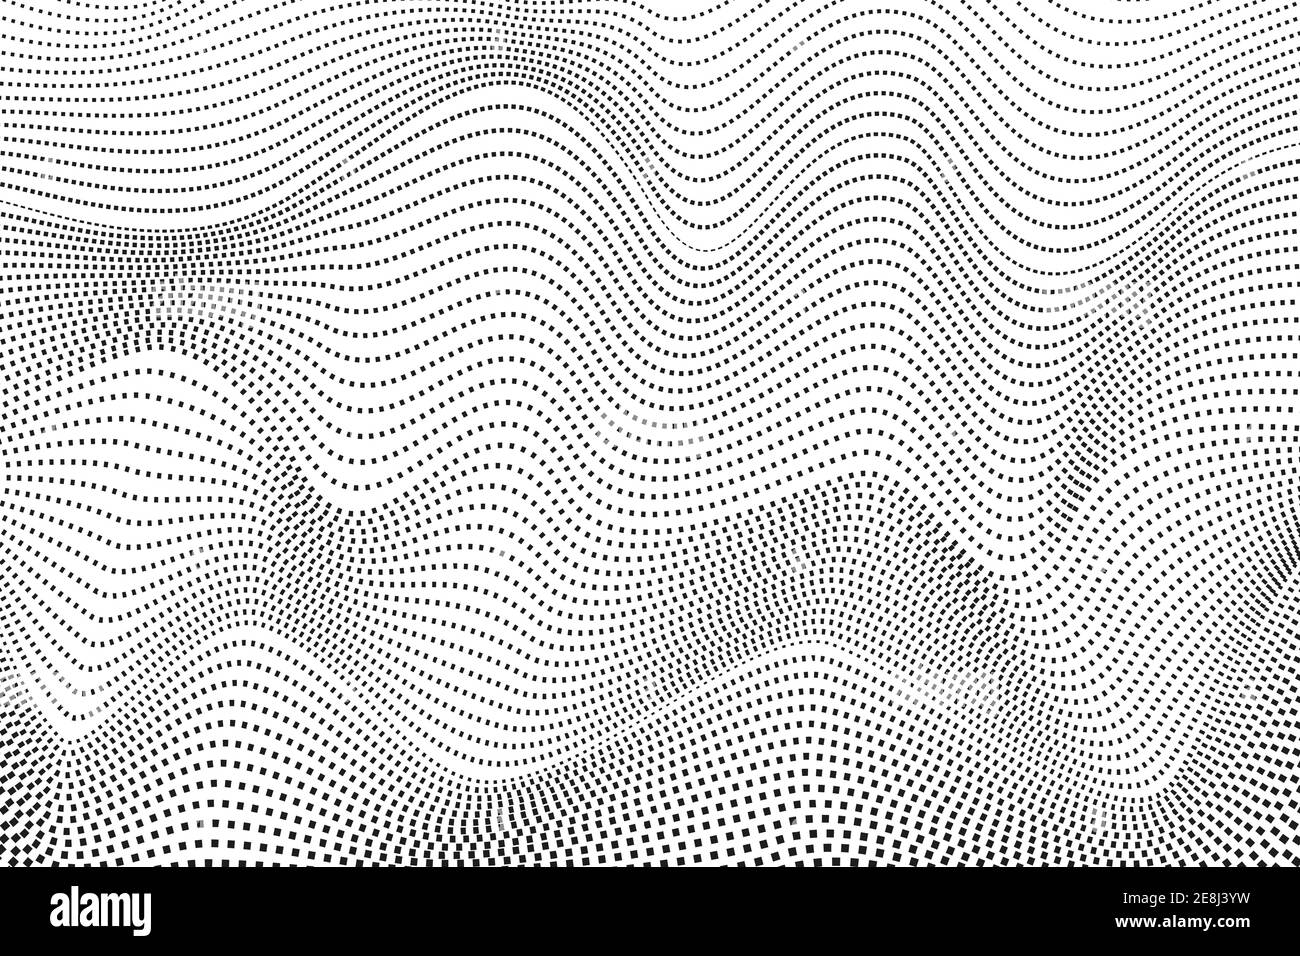 Waving black dotted lines. Digital halftone pattern, squiggly curves.  Abstract background. Monochrome waves design, industrial concept. Vector EPS10 Stock Vector